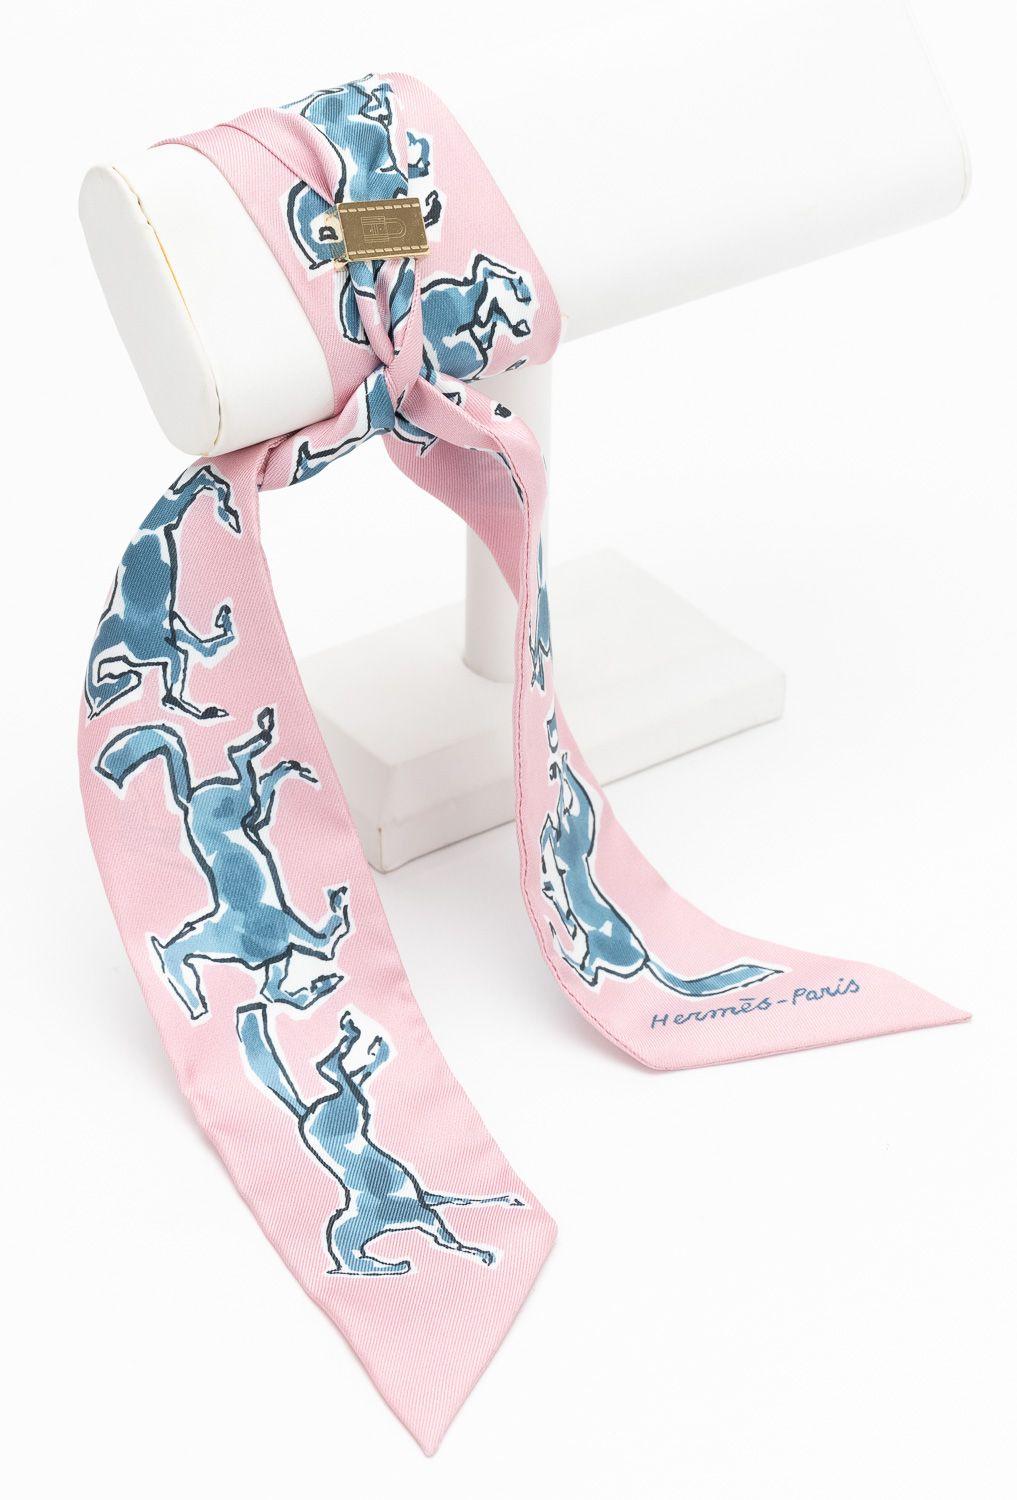 Hermès Horse Twilly in Rosé, with square slide. The pattern features horses in blue. The piece is in excellent condition. Comes with original box 